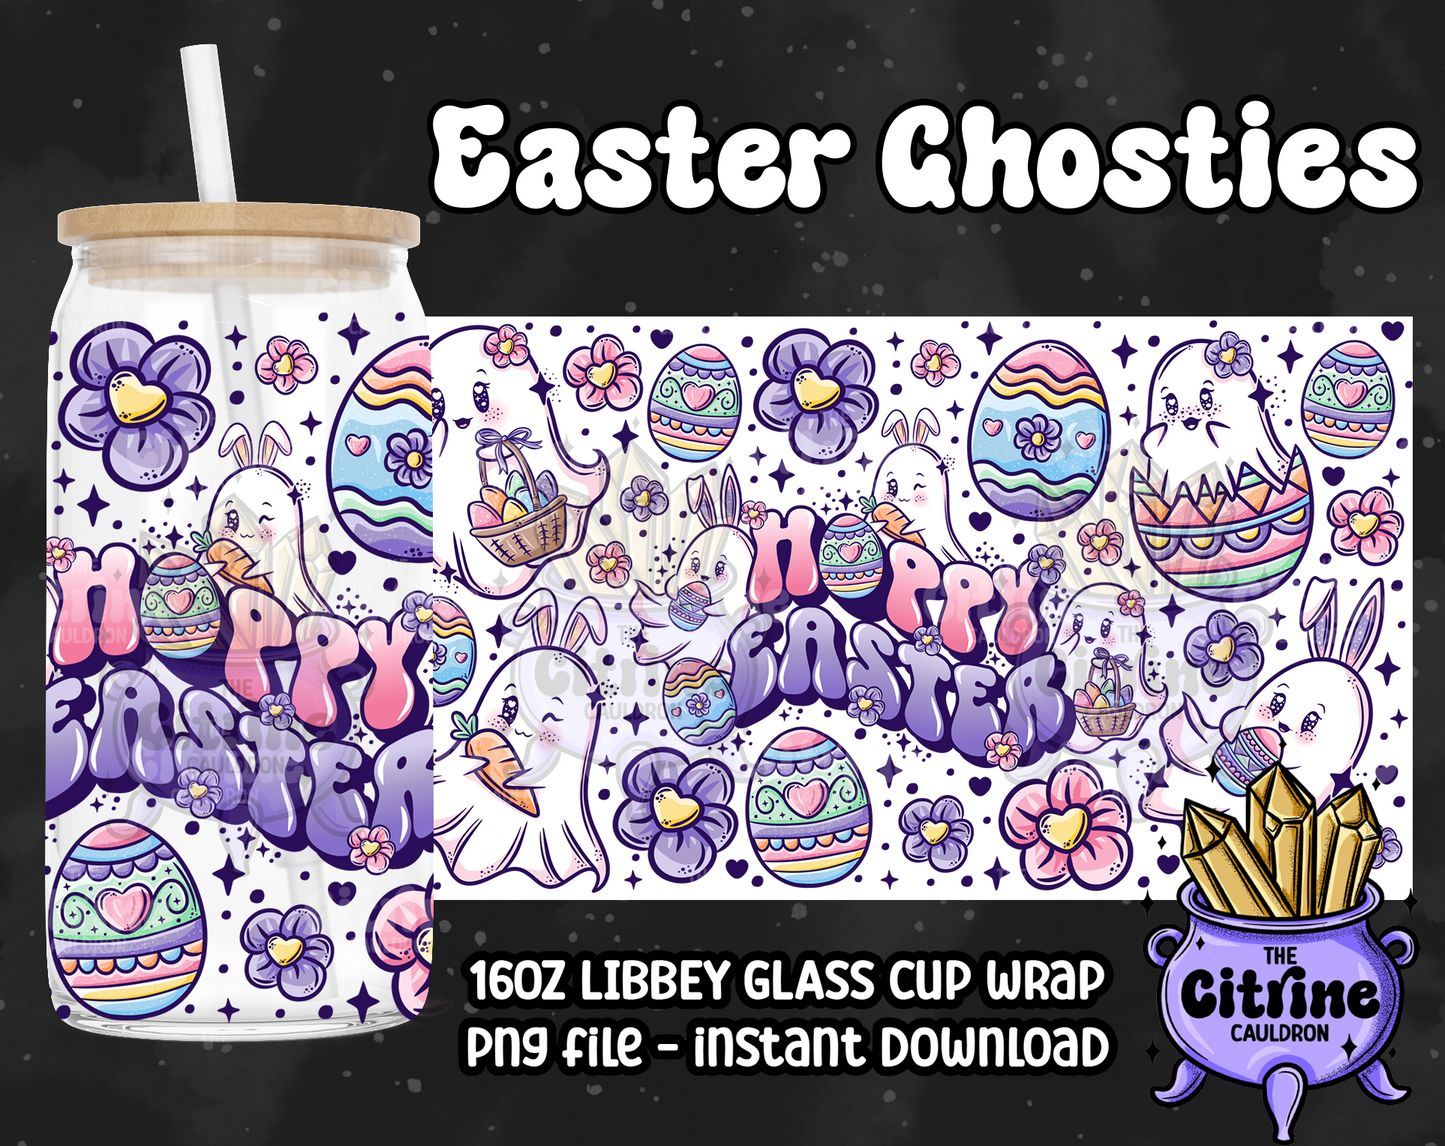 Easter Ghosties - PNG Wrap for Libbey 16oz Glass Can